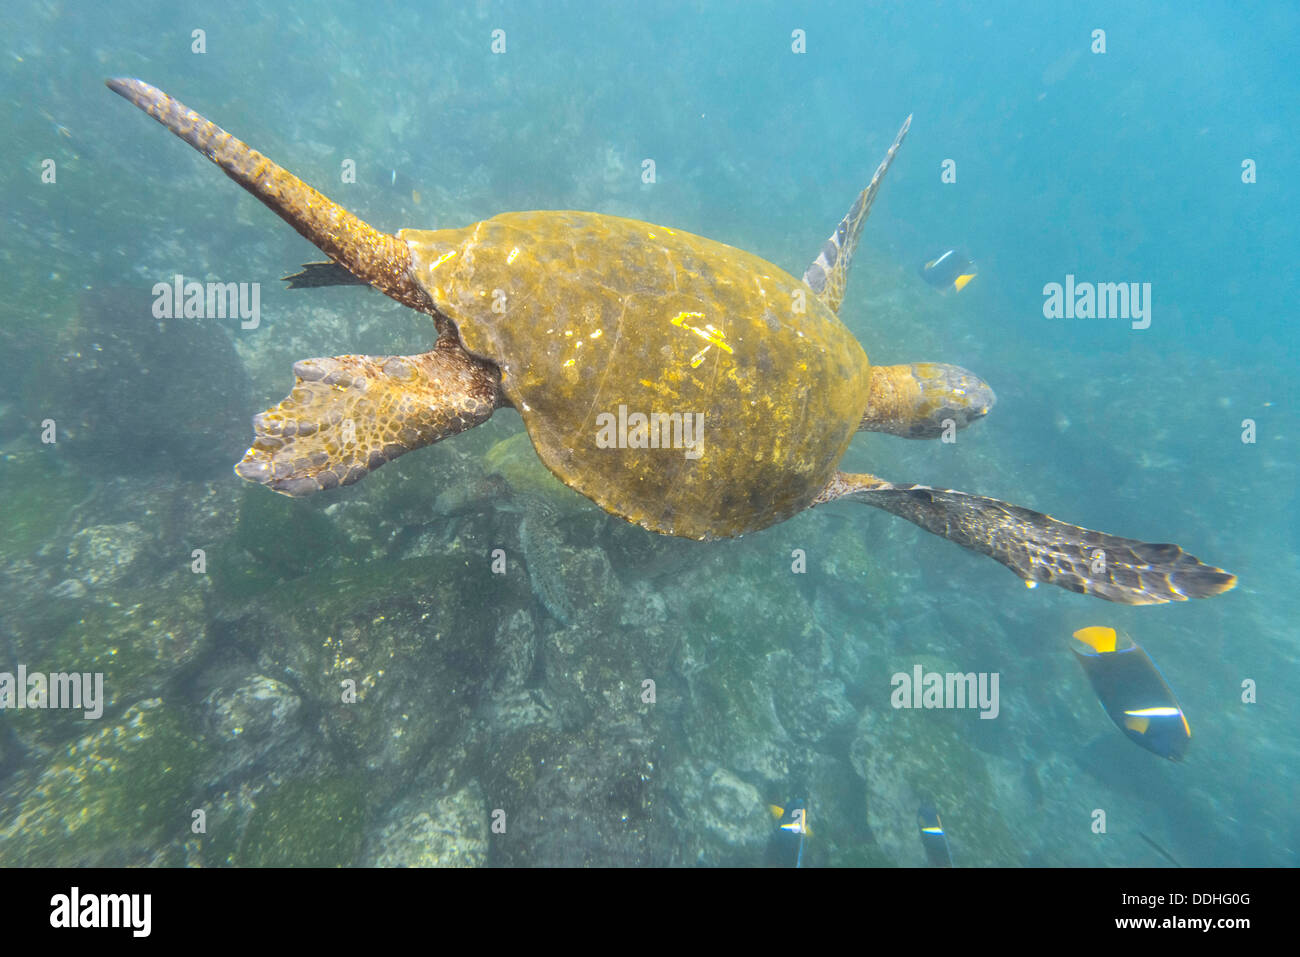 Green Sea Turtle or Pacific Green Turtle (Chelonia mydas japonica) and a Passer Angelfish or King Angelfish (Holacanthus passer) Stock Photo